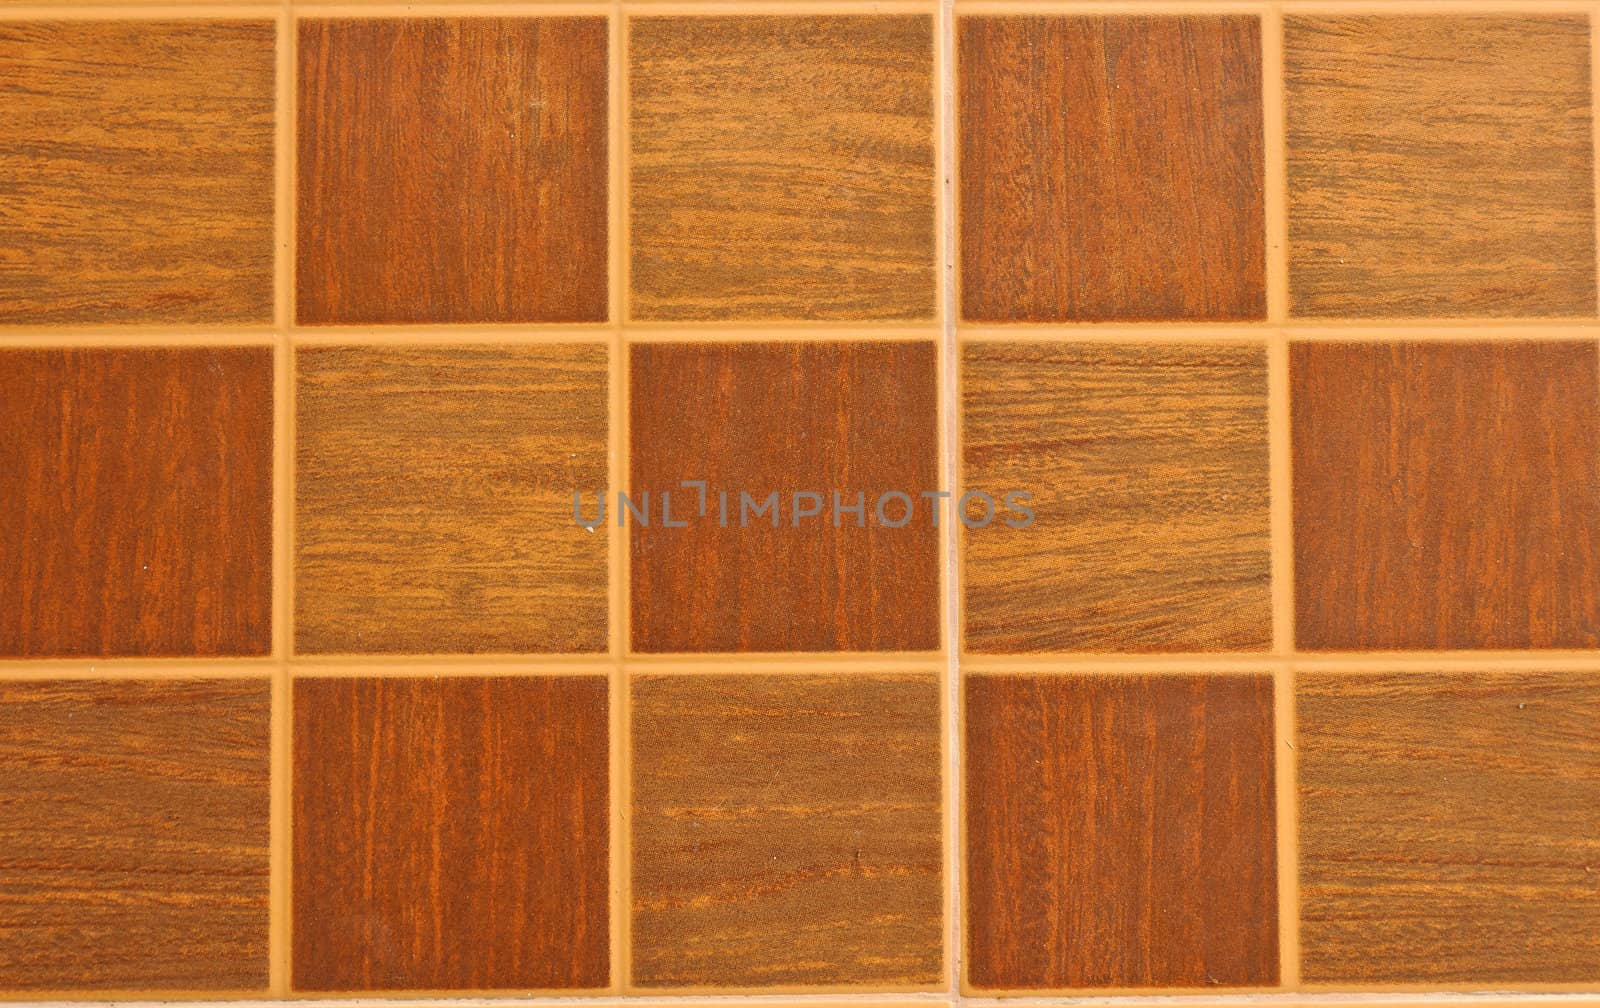 brown ceramic tiled floor background with space for text or image